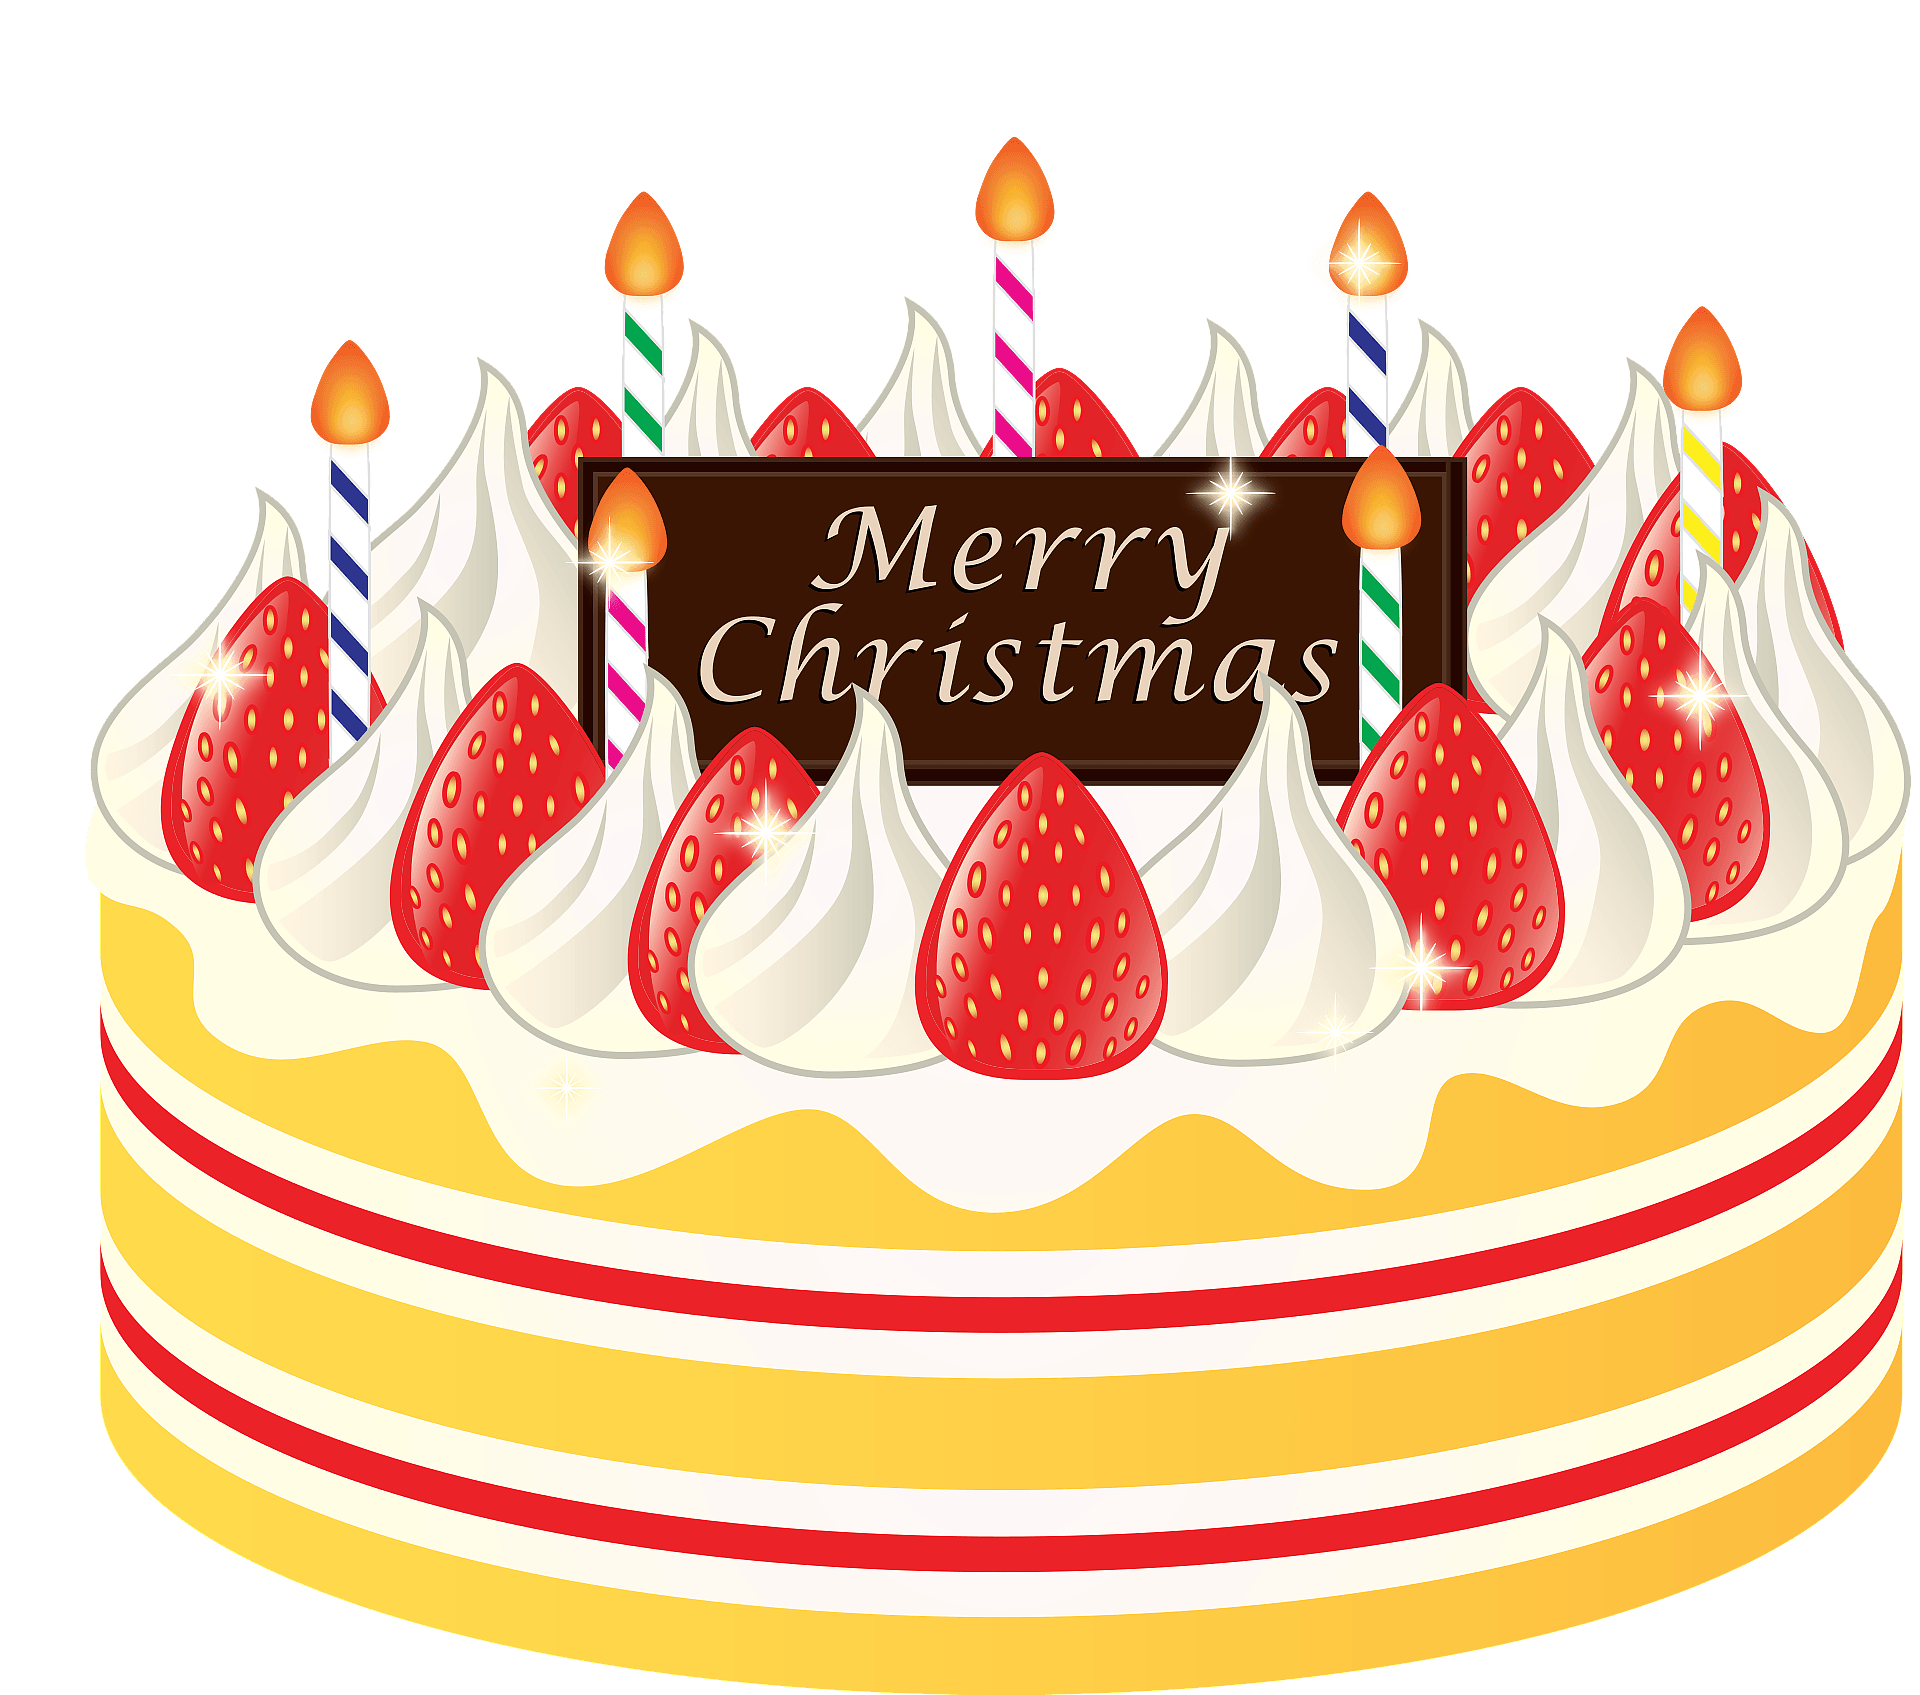 Download PNG image - Christmas Cake PNG Background Image 